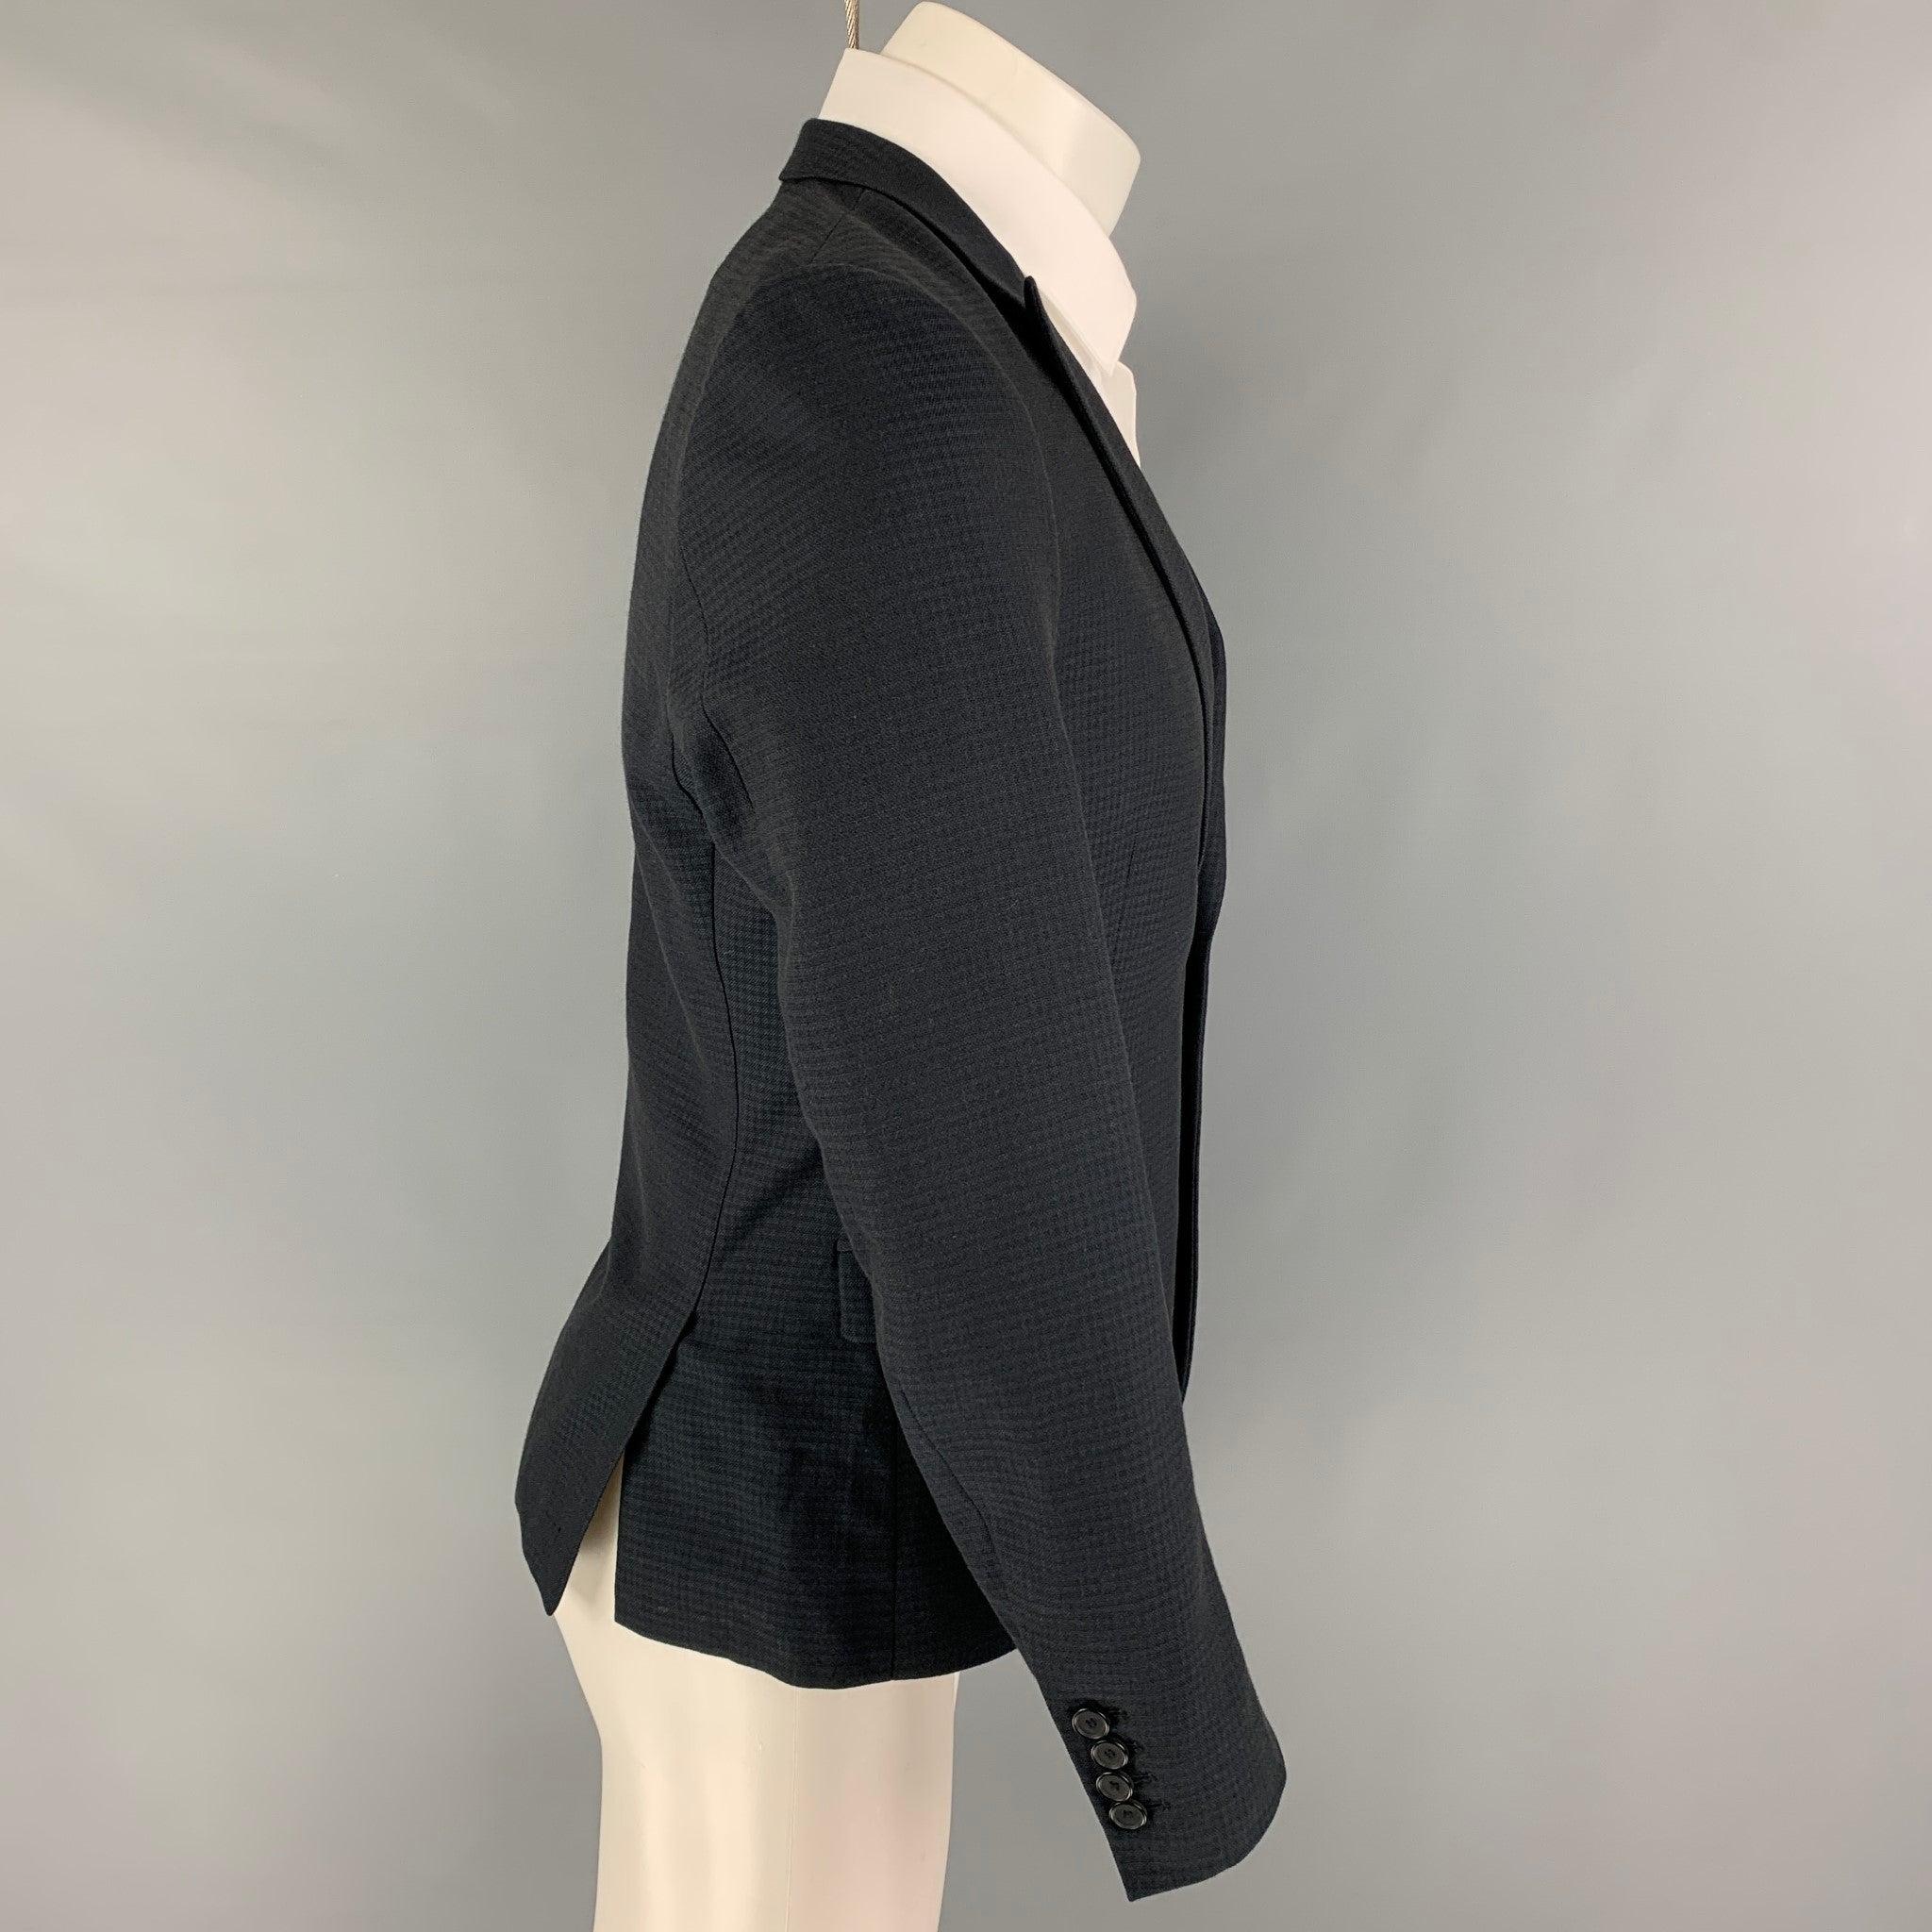 THE KOOPLES sport coat comes in a black grid wool with a full liner featuring a peak lapel, flap pockets, double back vent, and a double button closure.
Excellent
Pre-Owned Condition. 

Marked:   46 

Measurements: 
 
Shoulder: 16.5 inches Chest: 36